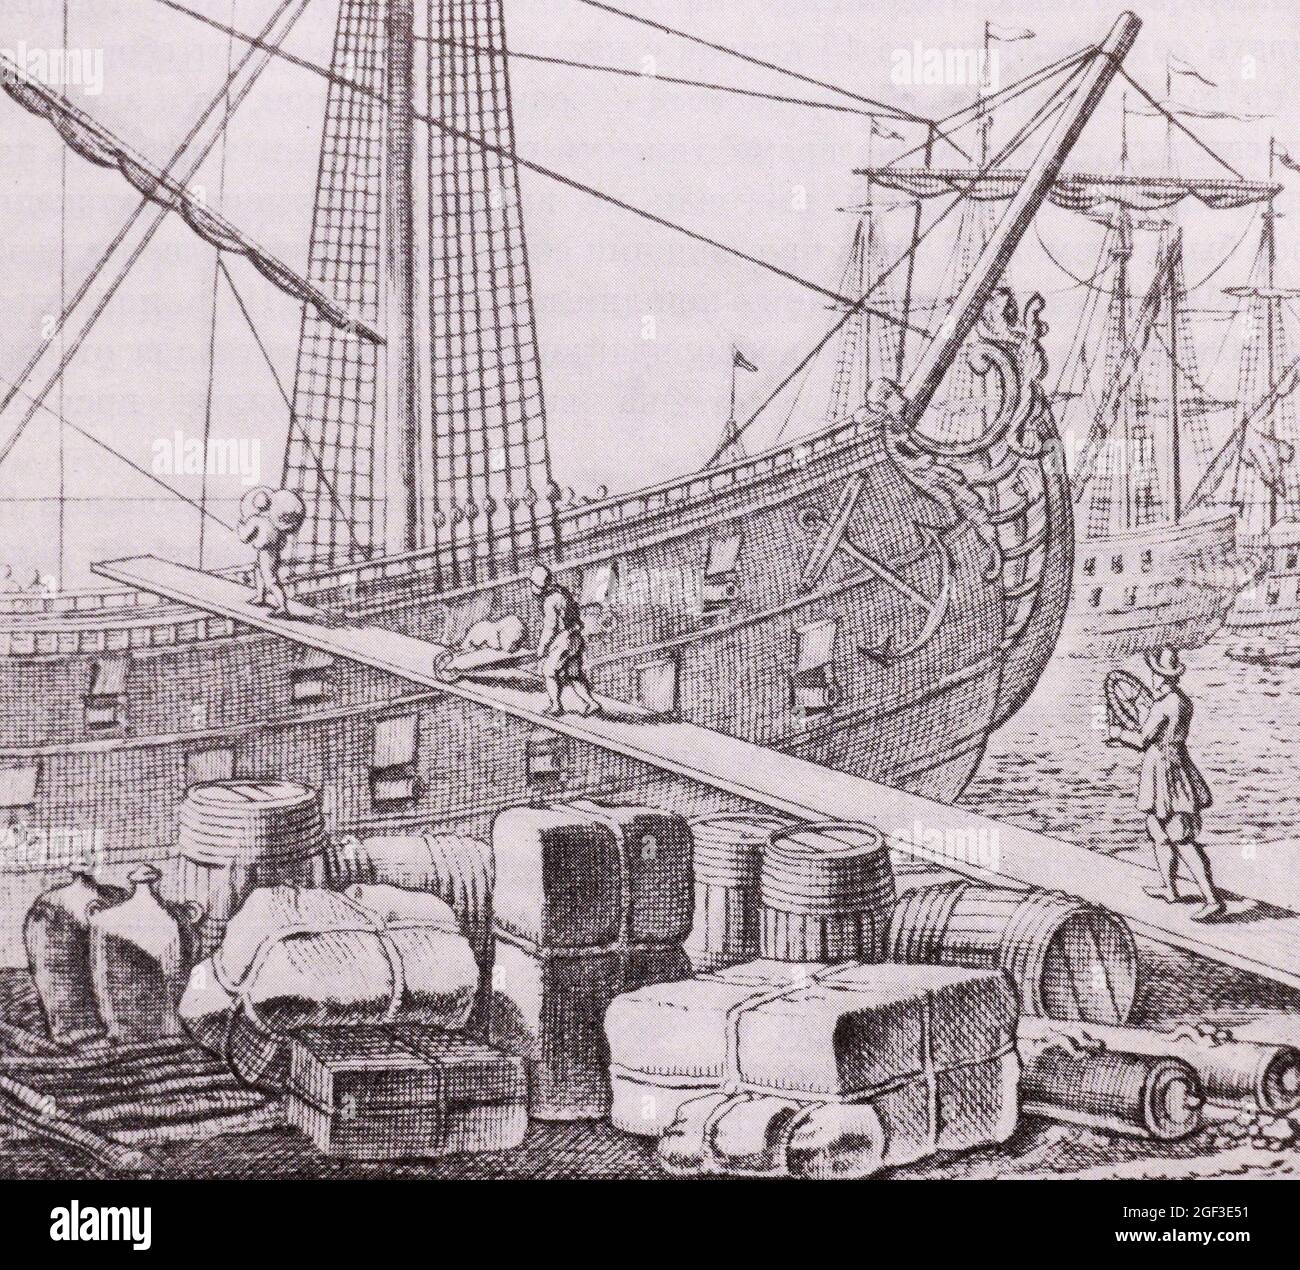 Unloading of foreign ships in Arkhangelsk. The engraving of the 18th century. Stock Photo